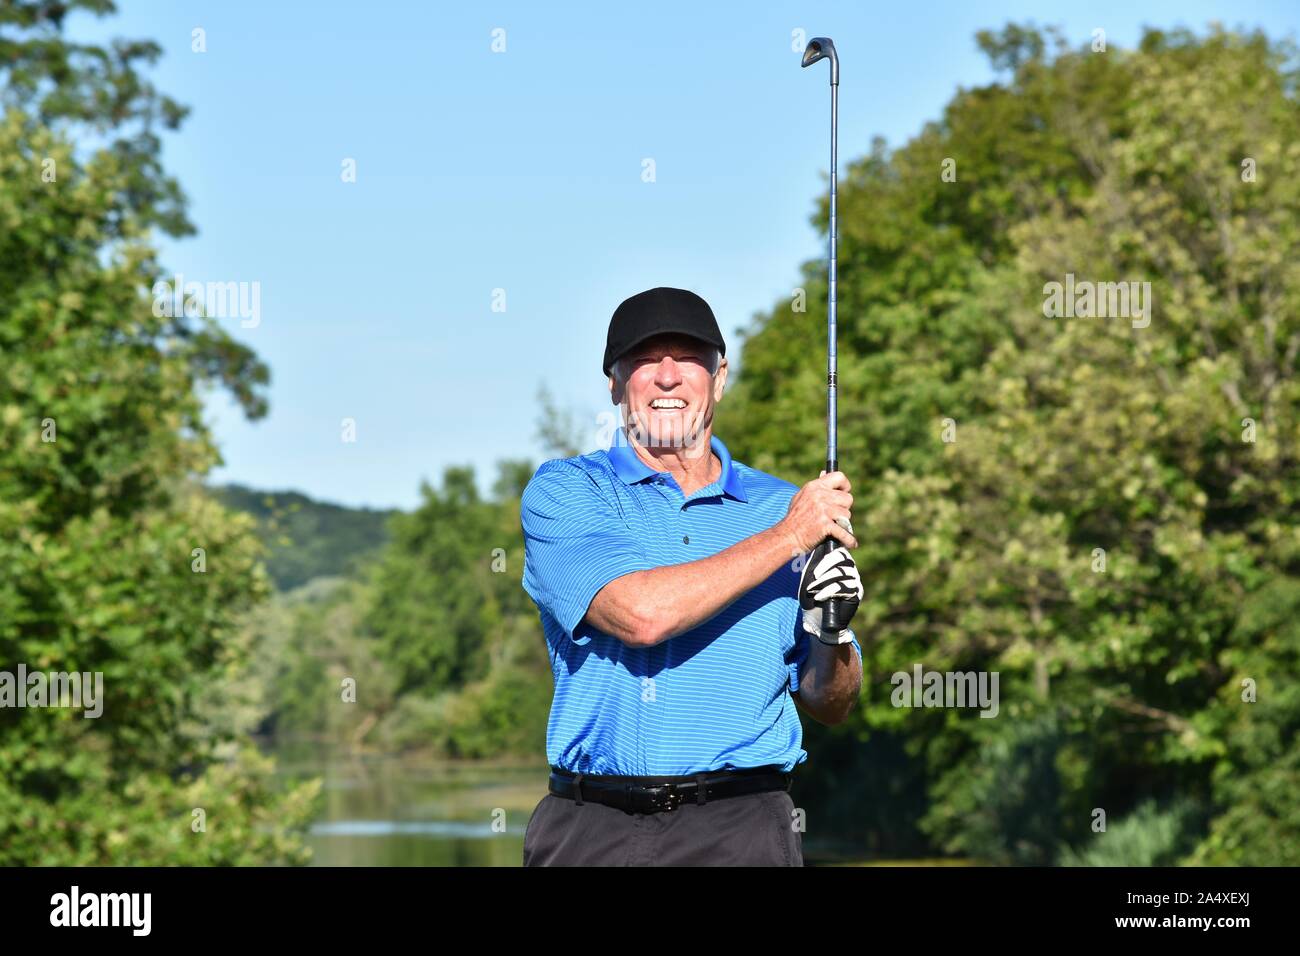 Adult Male Athlete Outdoors With Golf Club Playing Golf Stock Photo